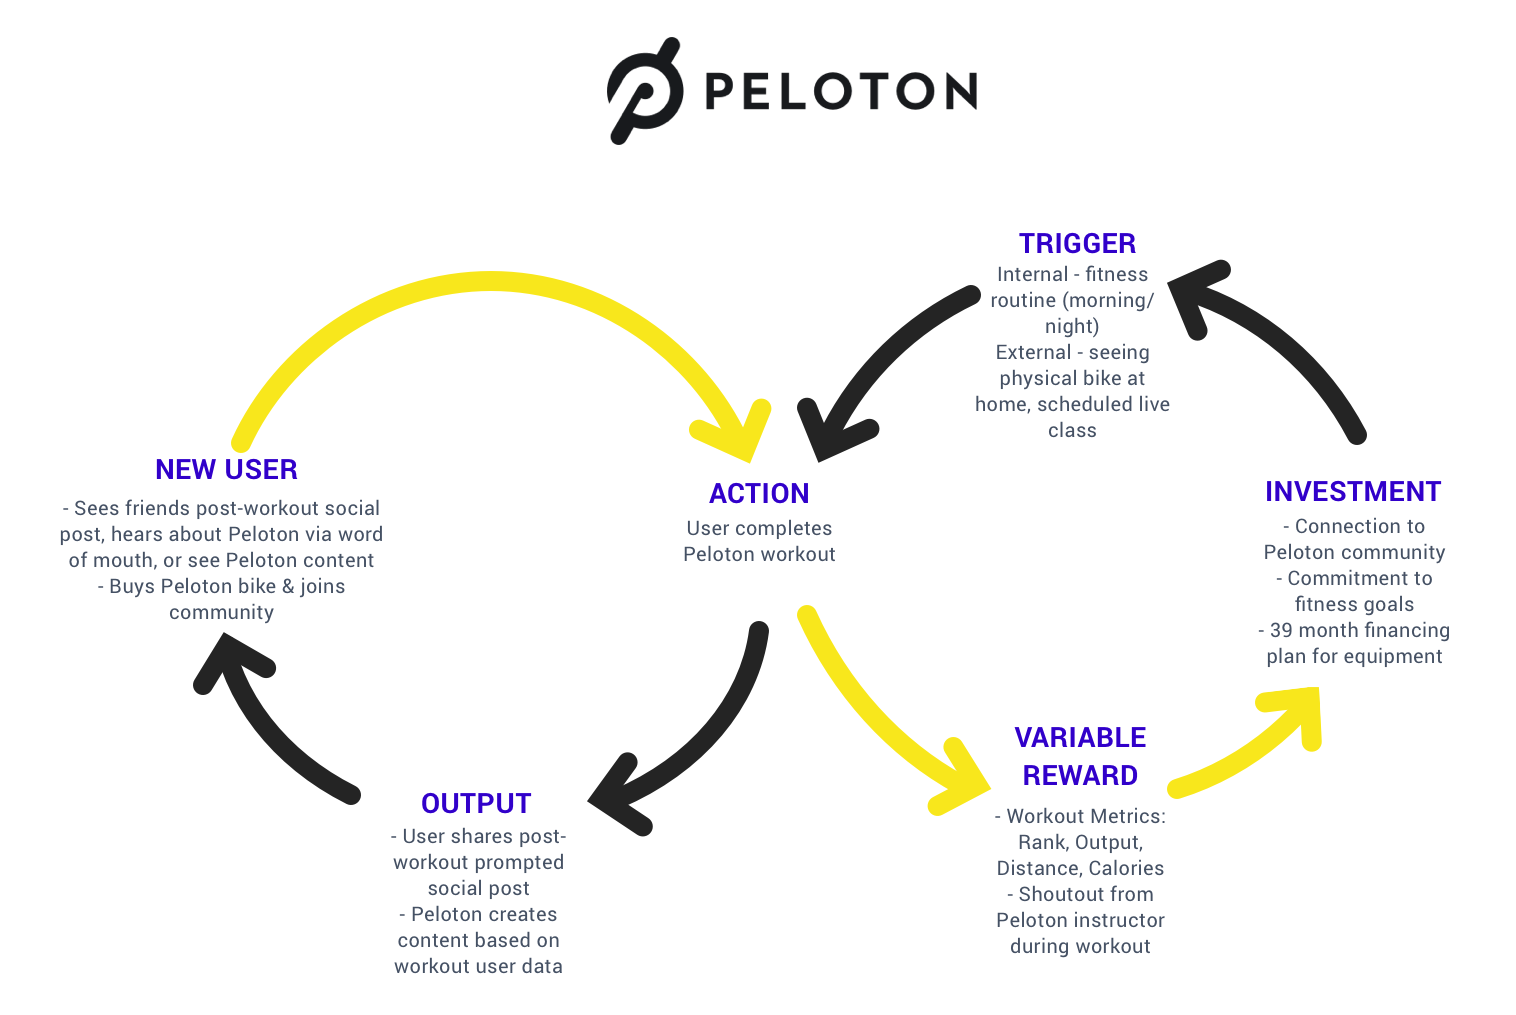 Peloton's acquisition Loop & Hook Model Growth Strategy